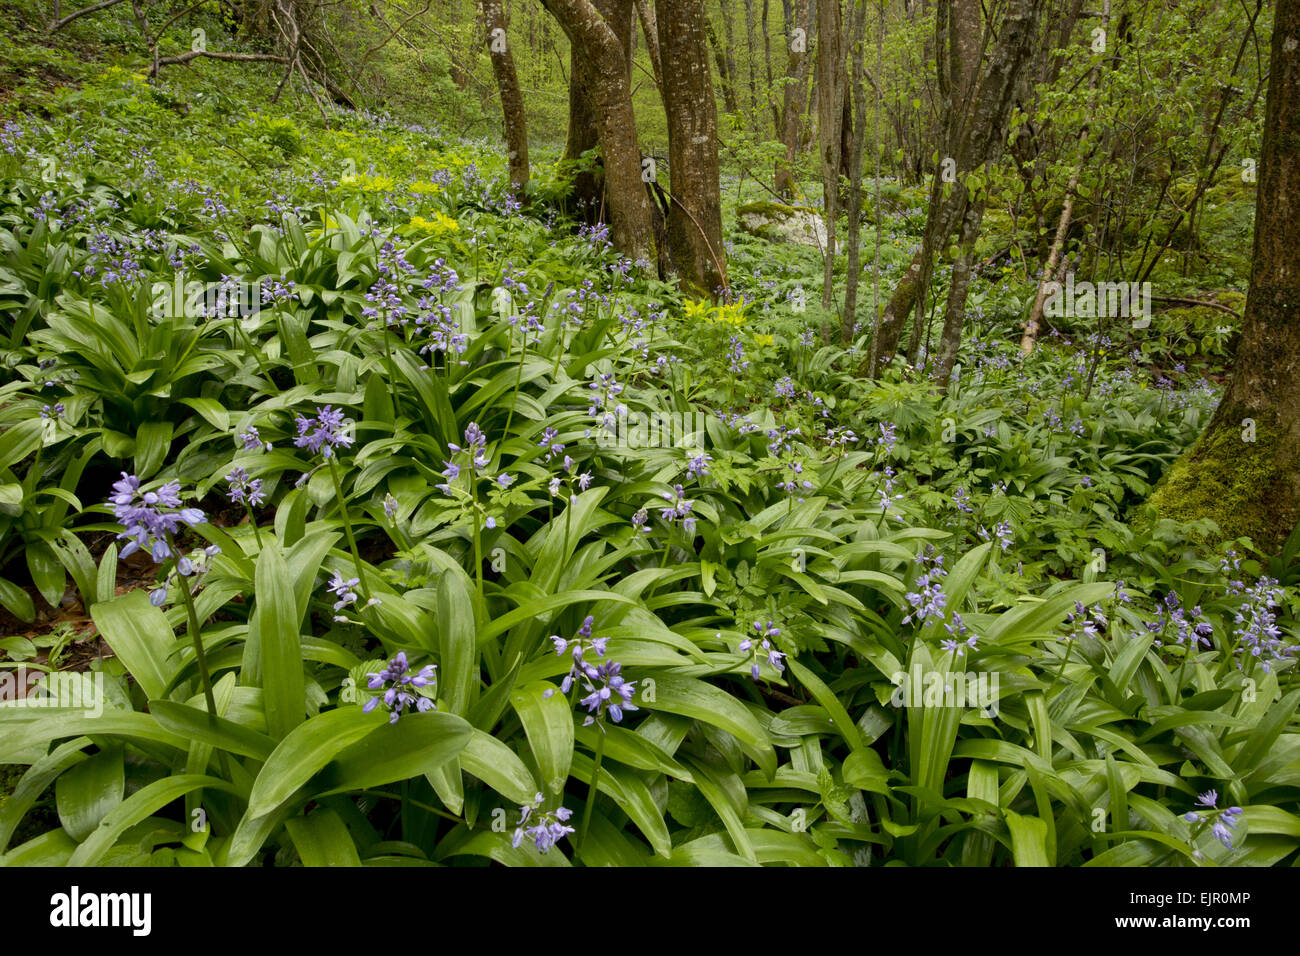 Pyrenean Squill (Scilla liliohyacinthus) flowering mass, growing in woodland habitat, French Pyrenees, France, May Stock Photo